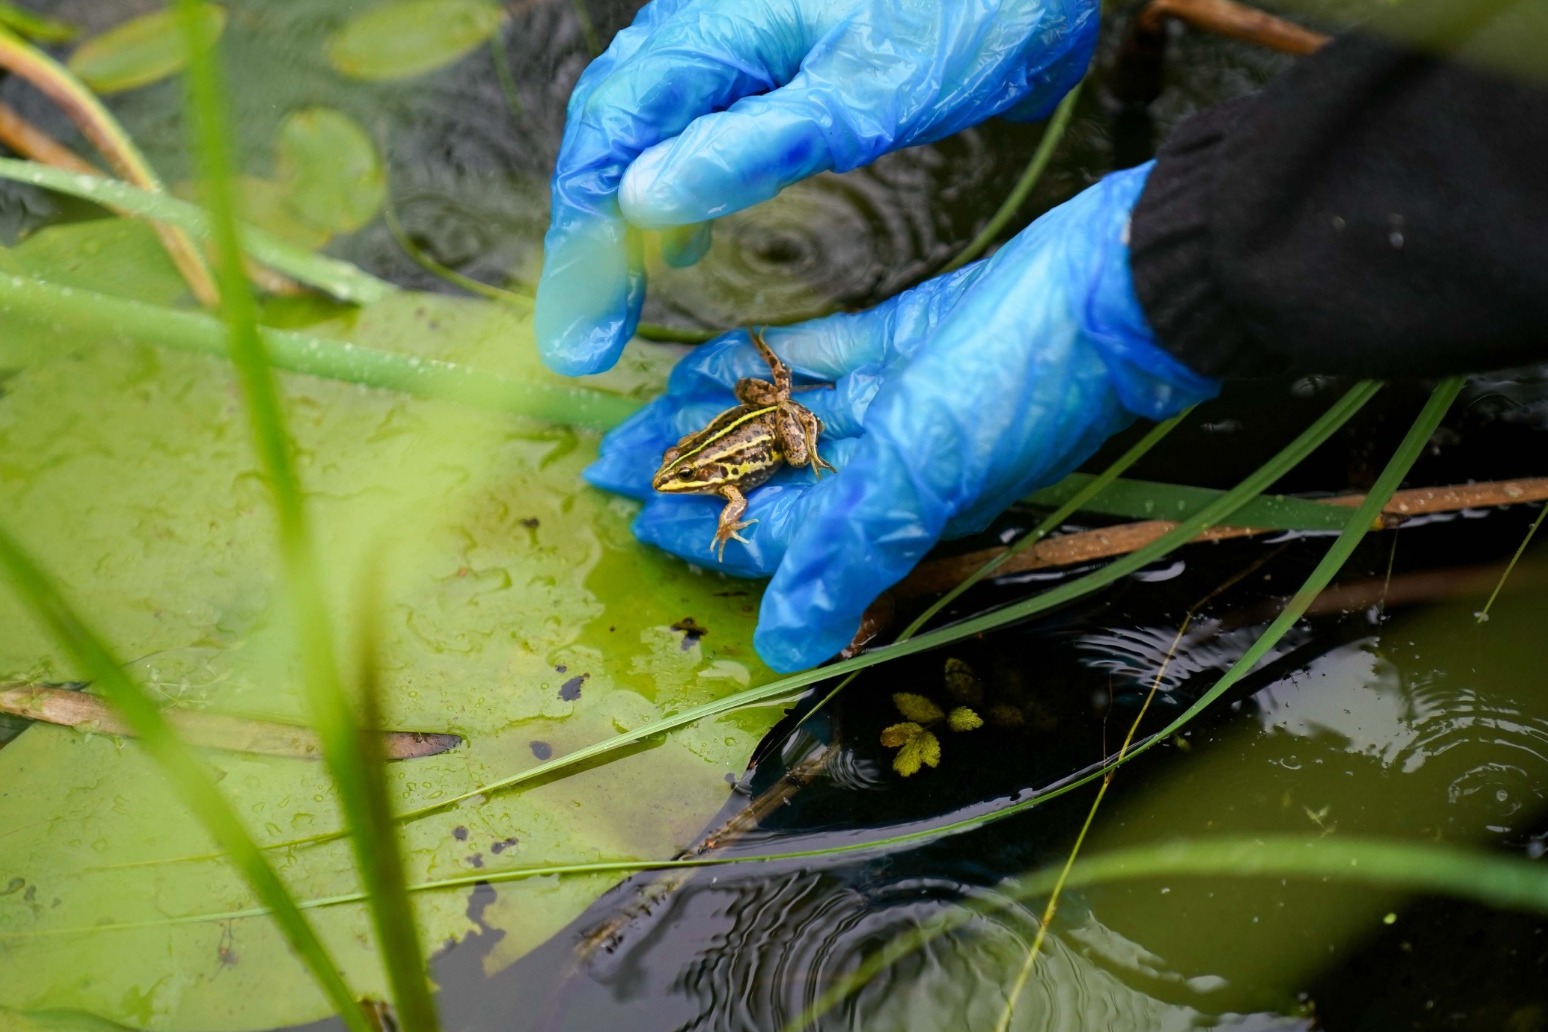 Frog that became extinct in England reintroduced to its former home 